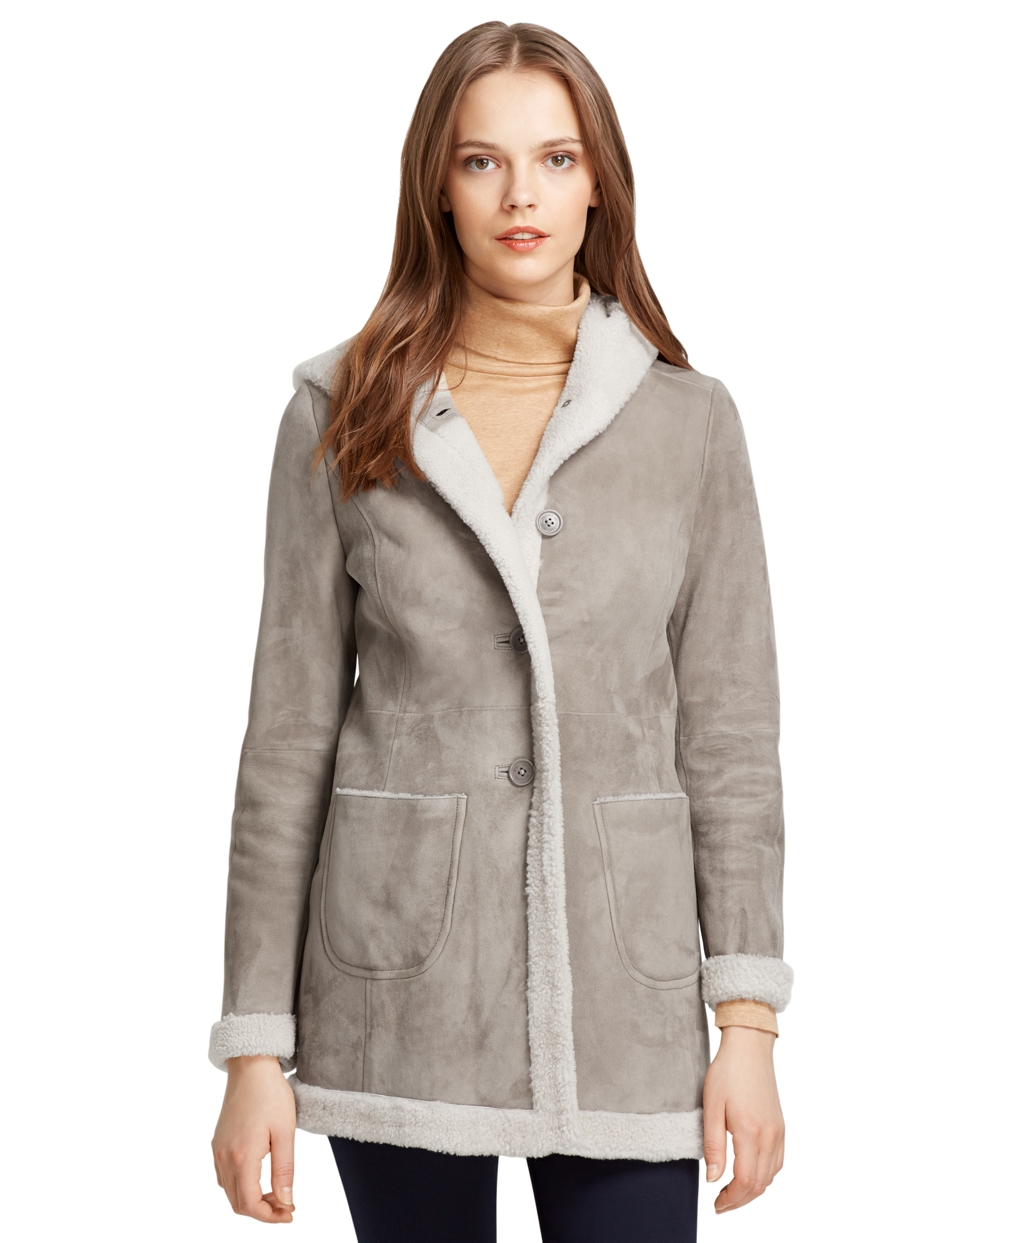 Lyst - Brooks Brothers Hooded Shearling Coat in Gray